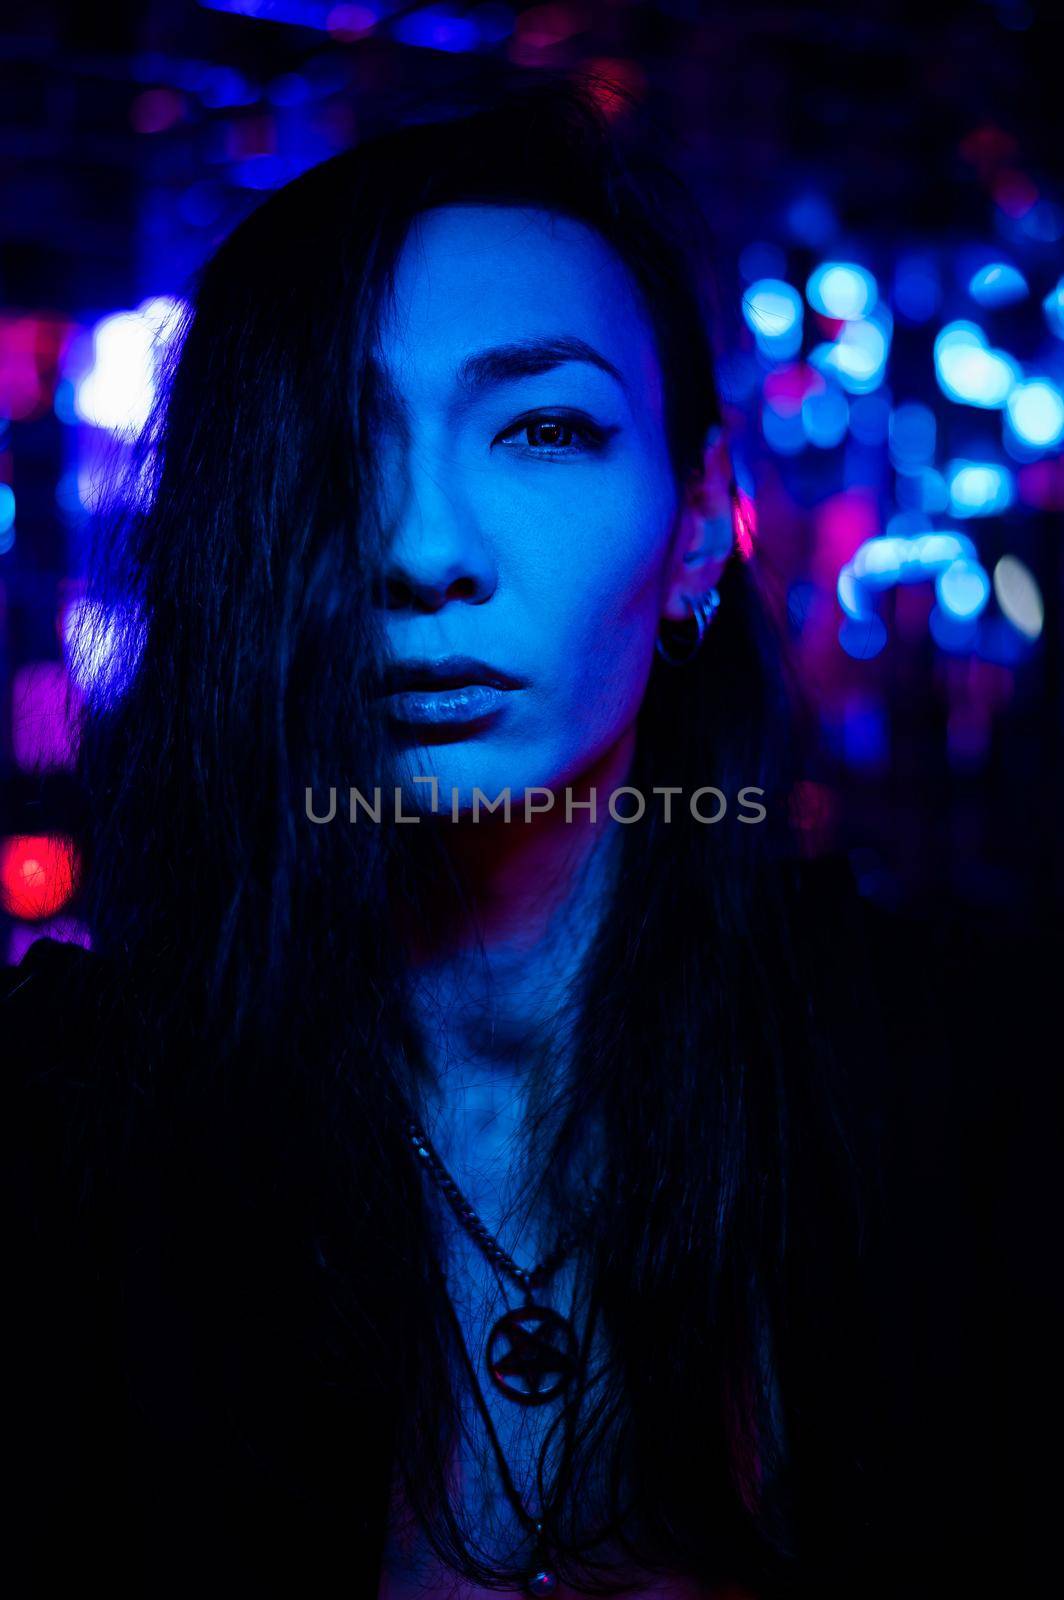 Portrait of a transgender model in a studio with neon lighting. by mrwed54